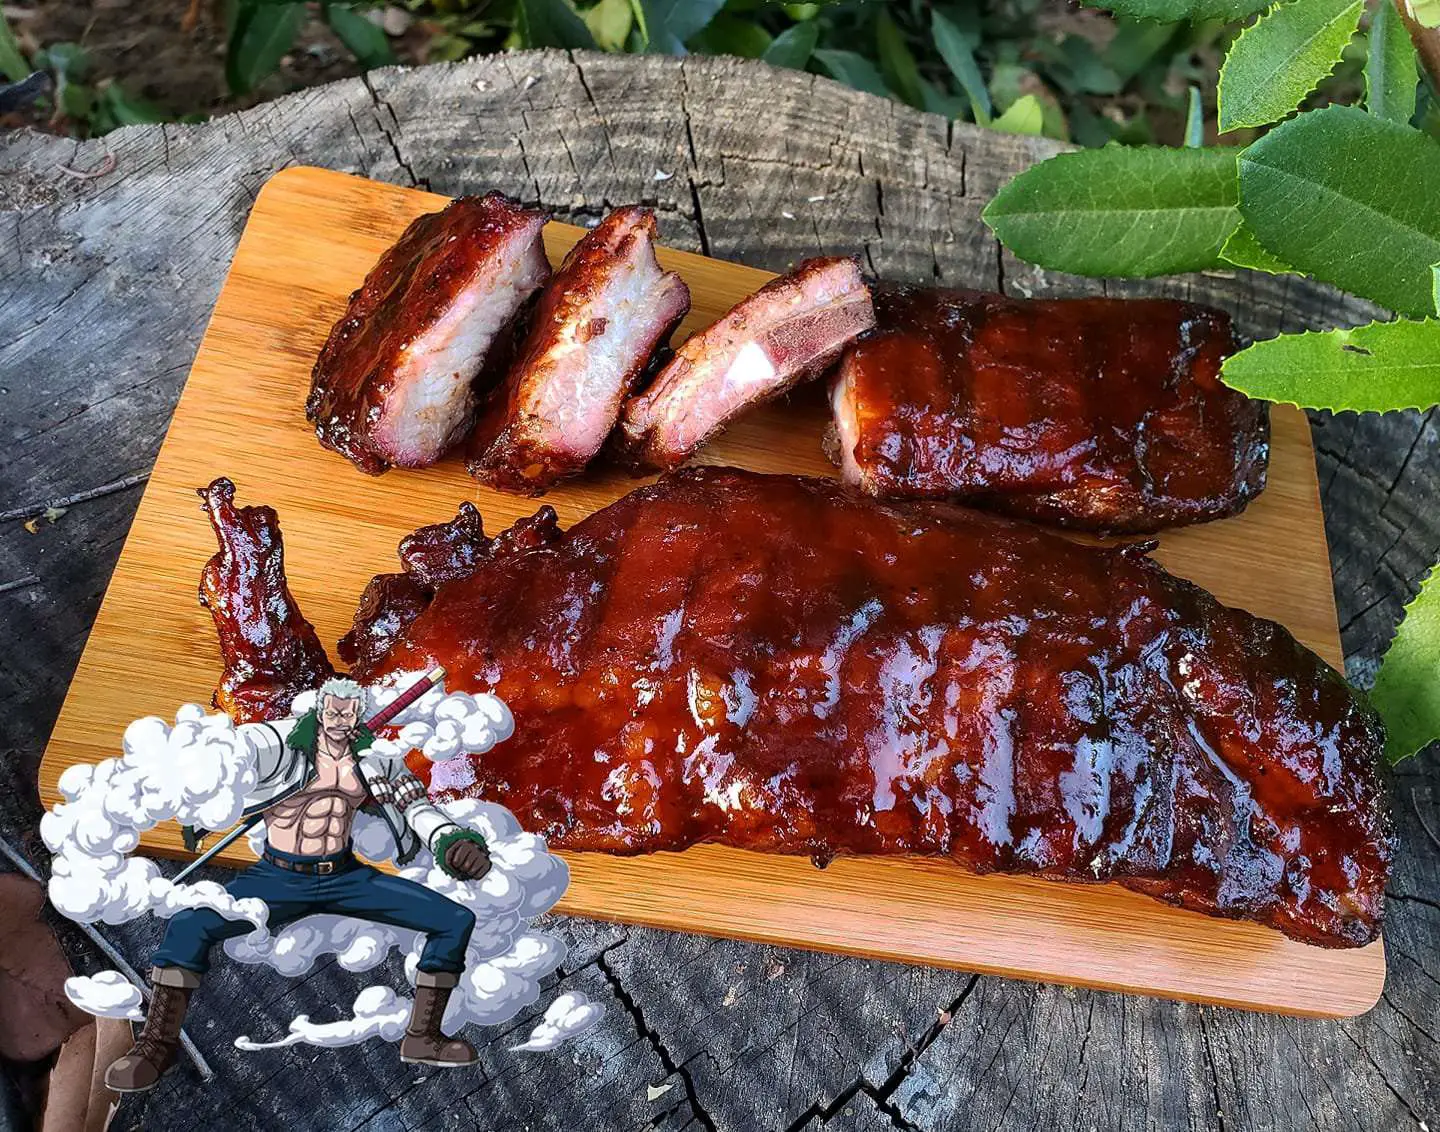 Cooking Tips: How to Smoke Ribs on a Charcoal Grill